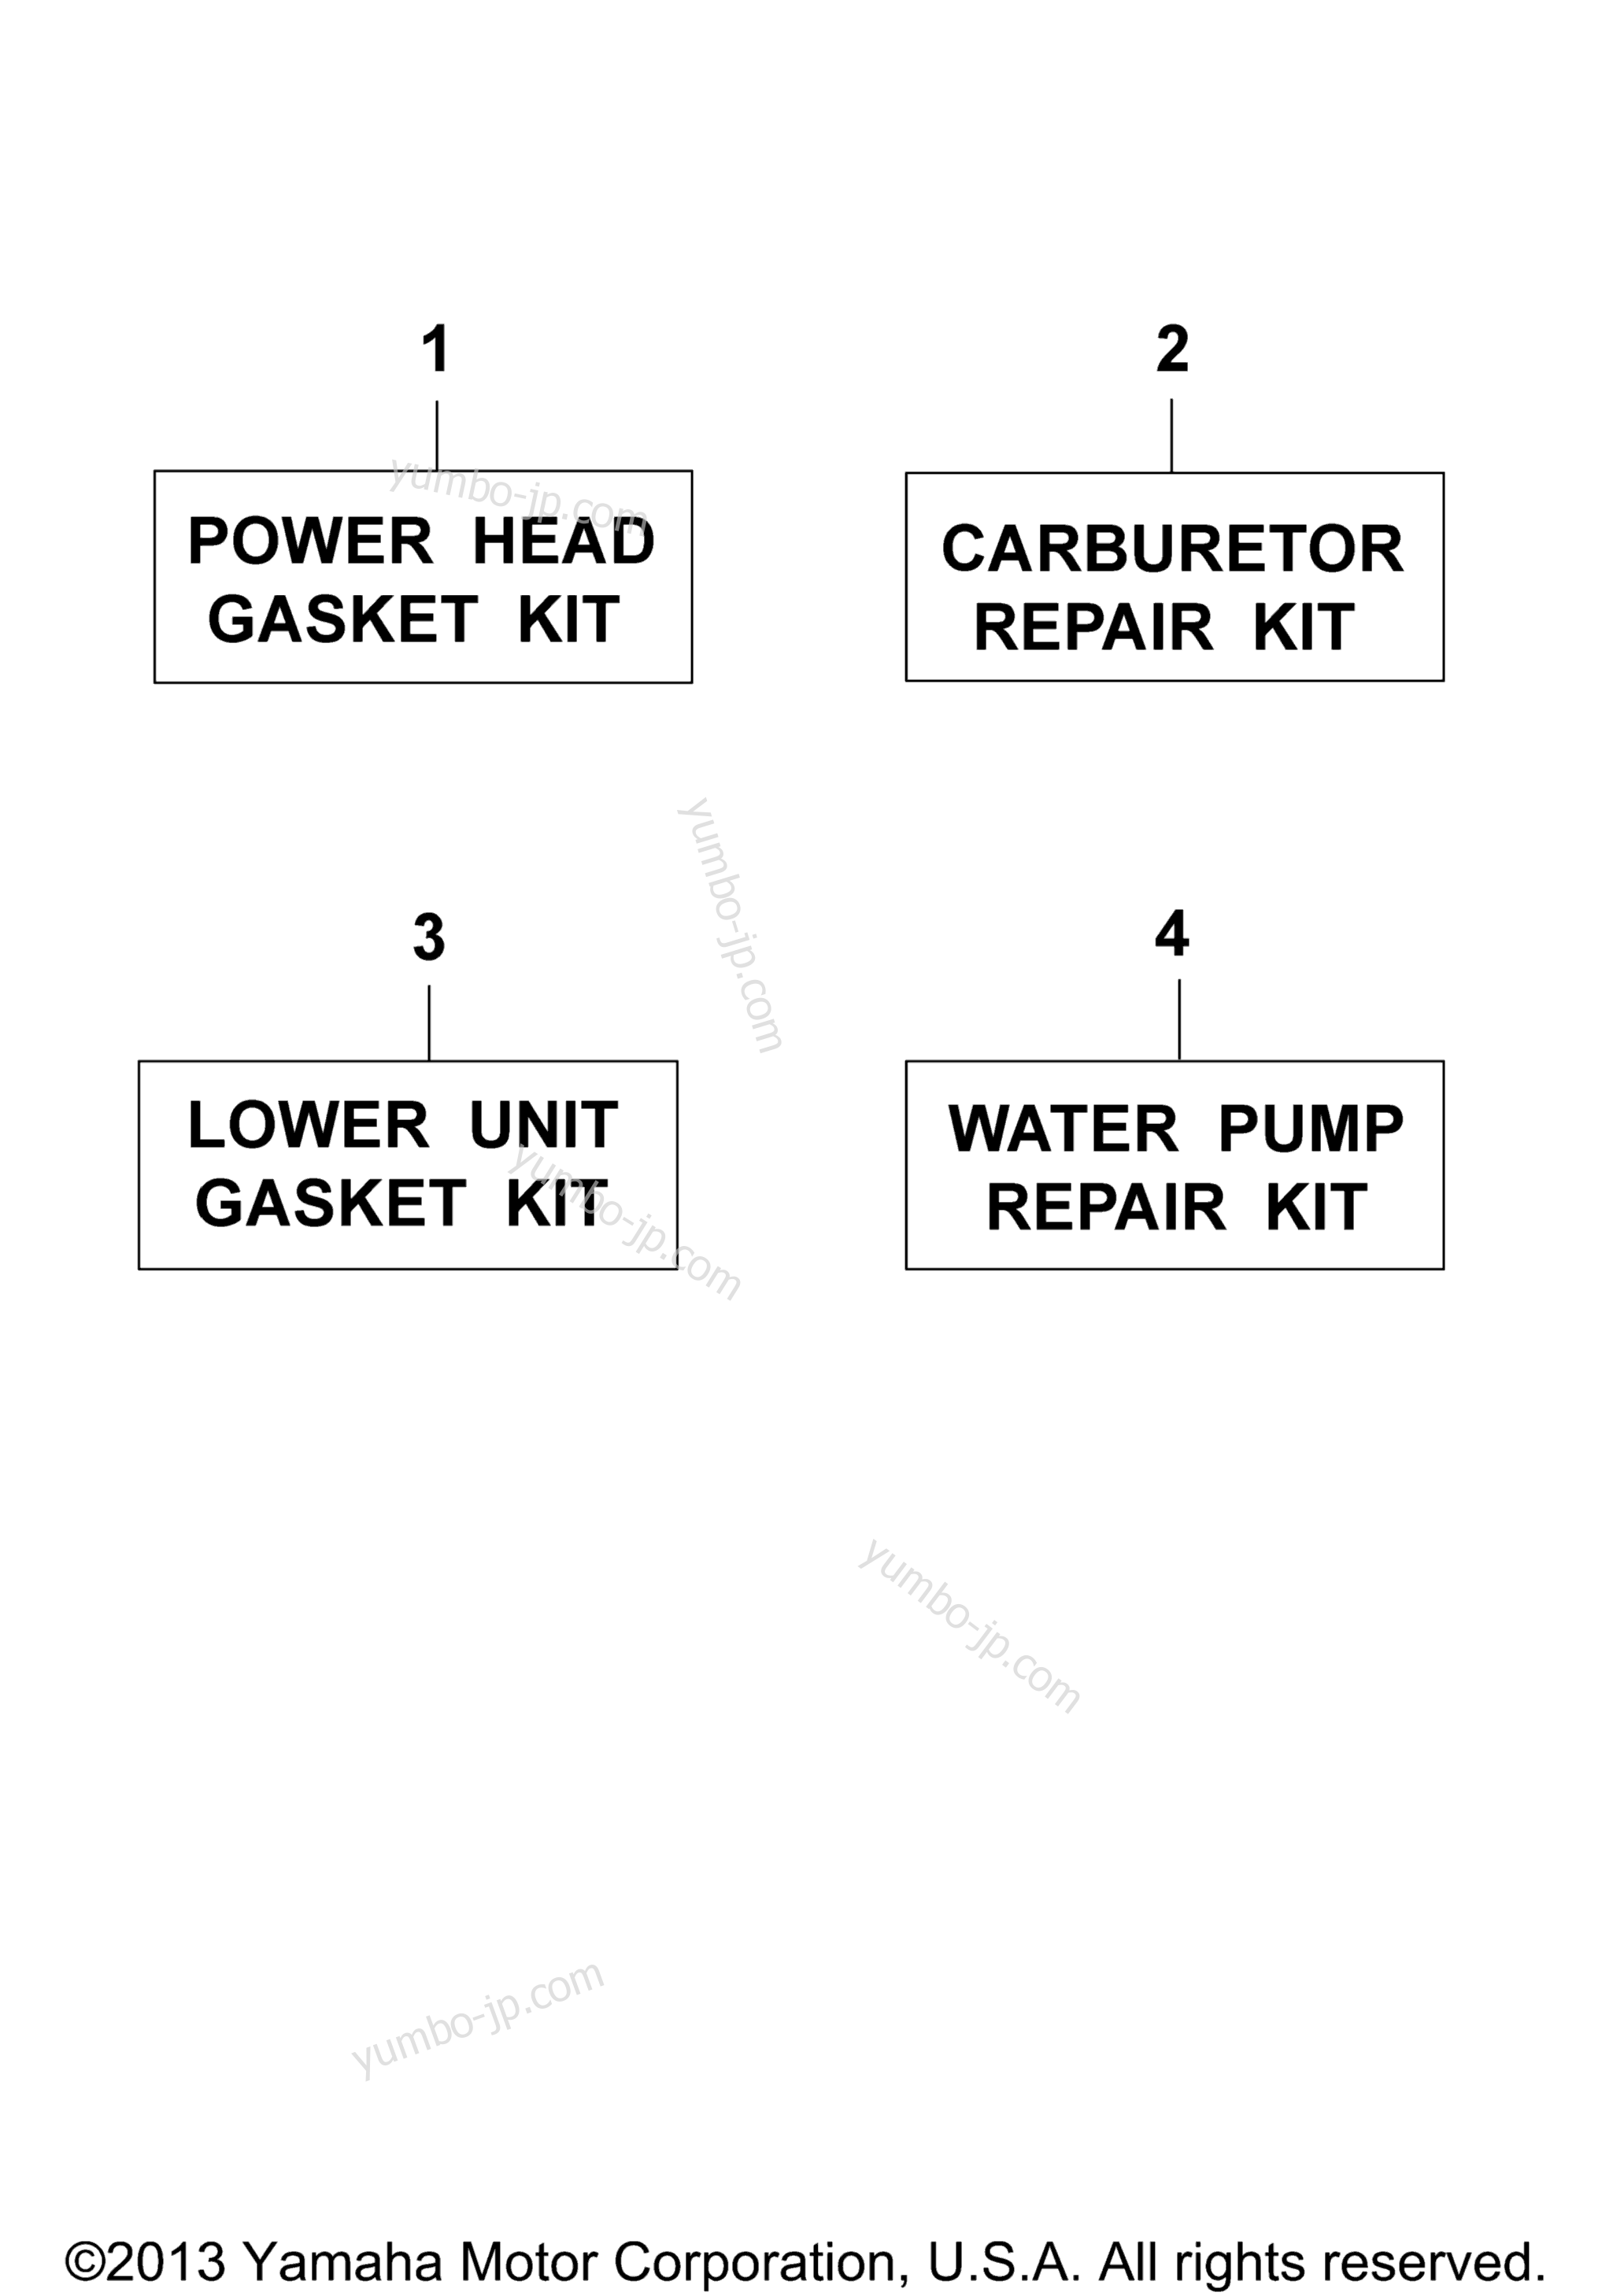 Repair Kit for outboards YAMAHA 40ETLH 1987 year